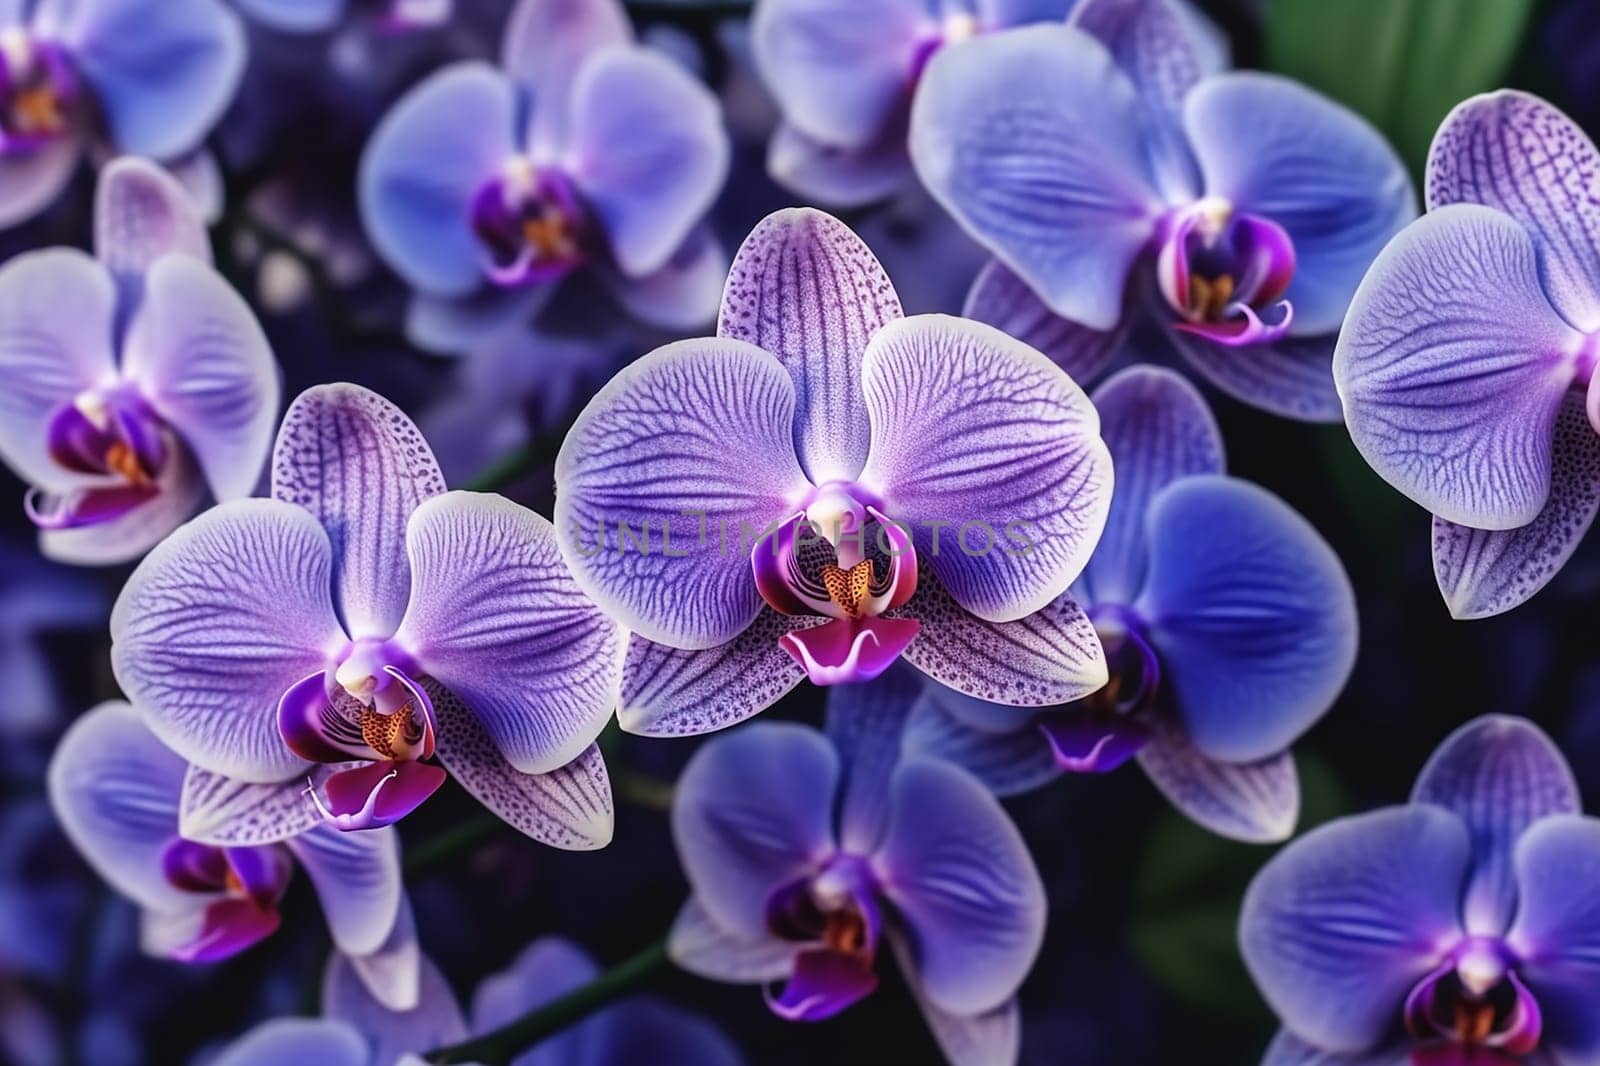 Close-up of vibrant purple and white orchids with delicate patterns.